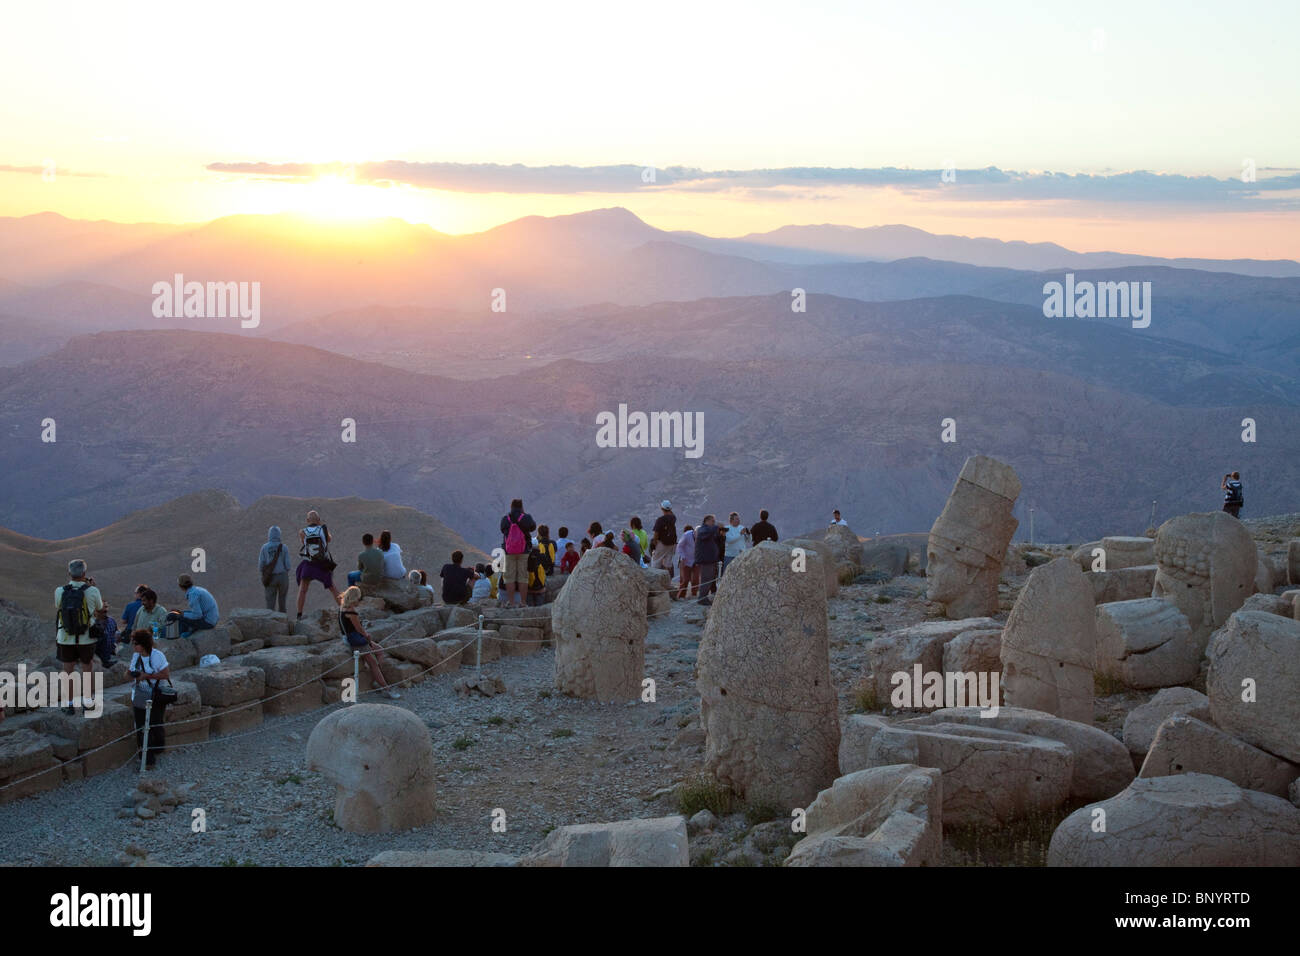 Tourists taking pictures of the sunset at Mount Nimrut in Turkey Stock Photo